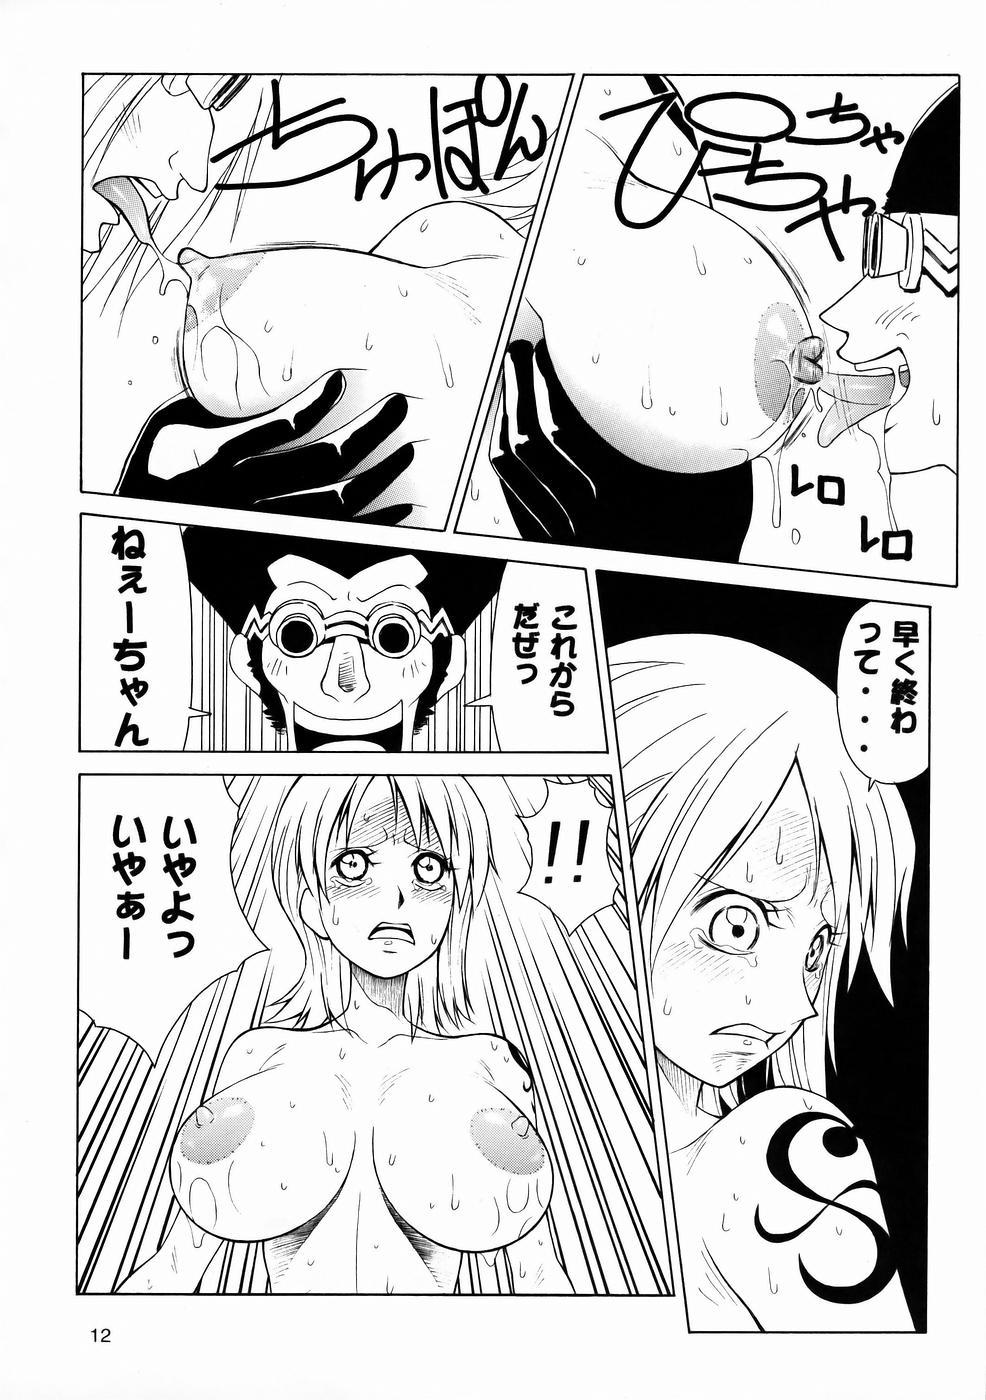 Upskirt Mikisy Vol. 6 - One piece Gay Medic - Page 13